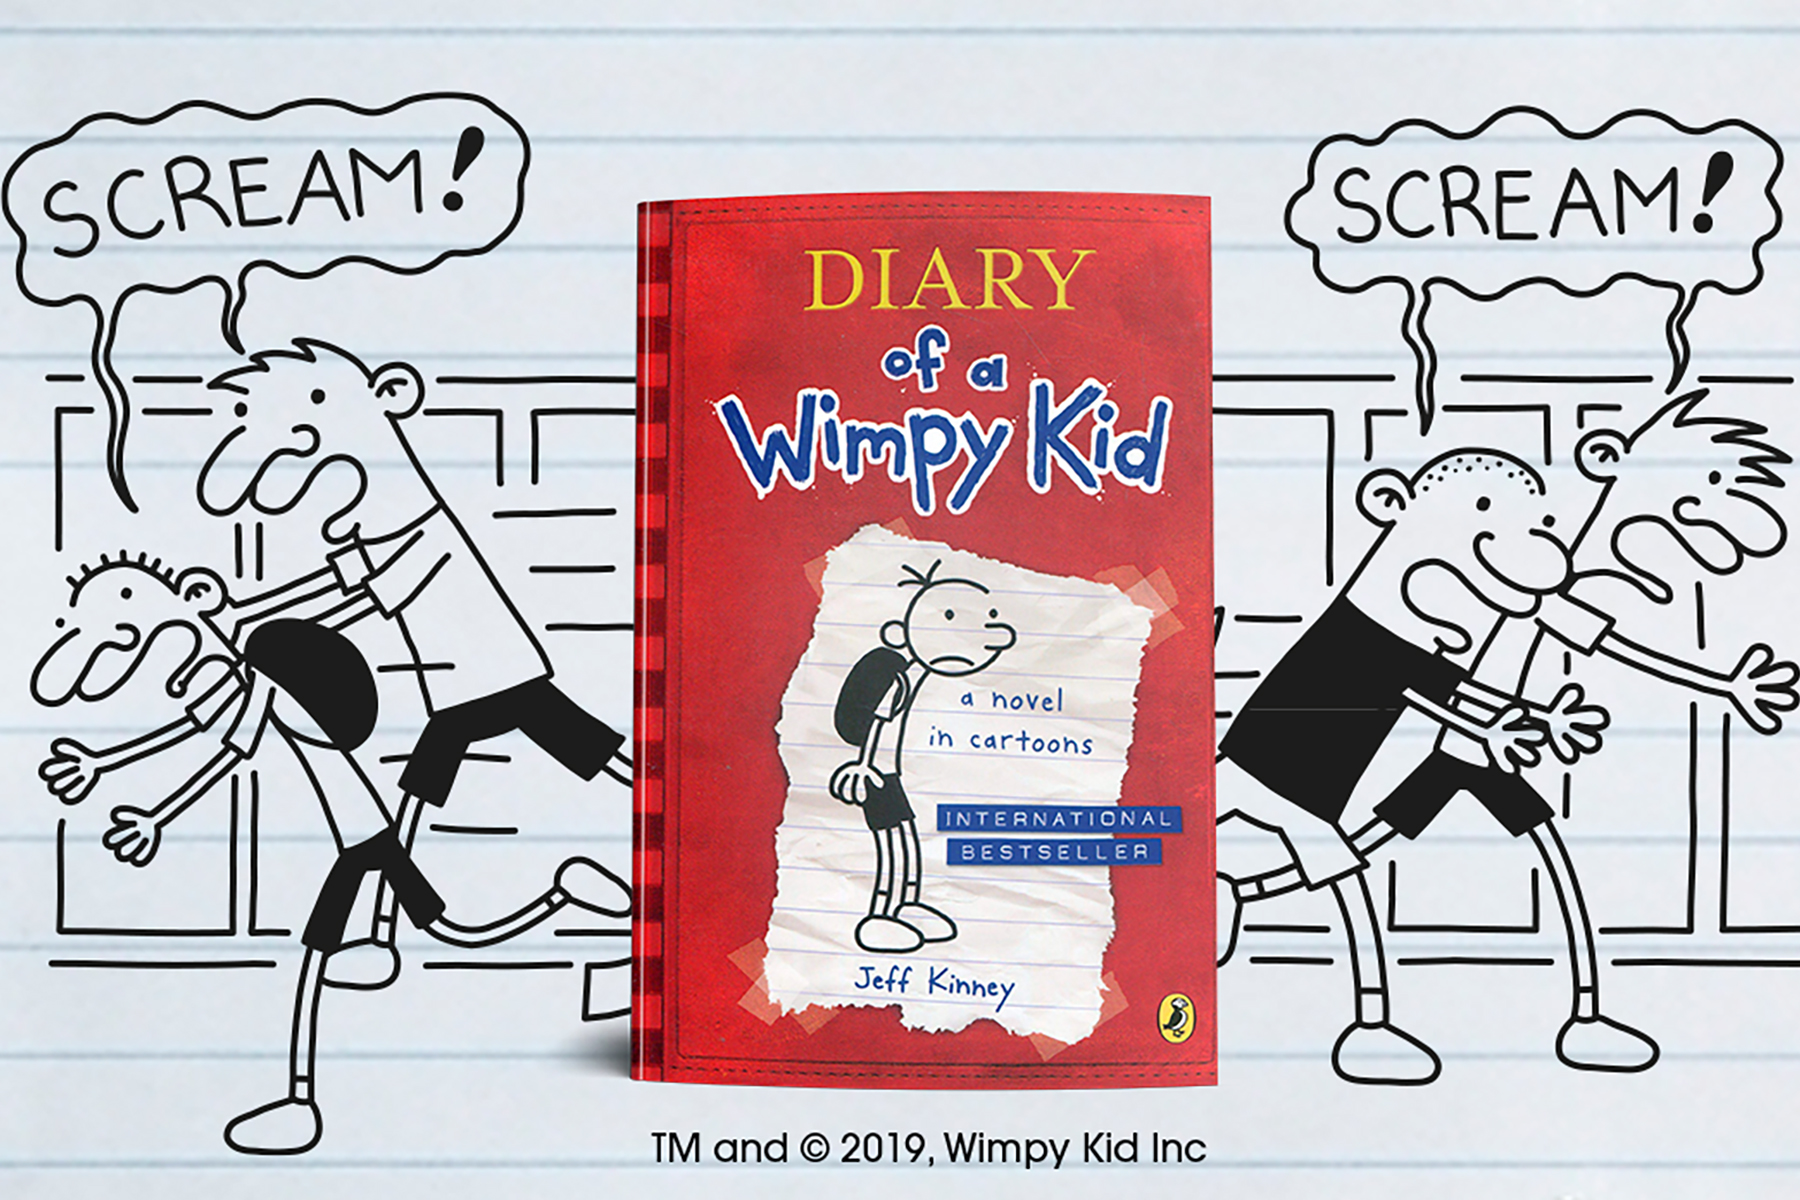 book 6 diary of a wimpy kid